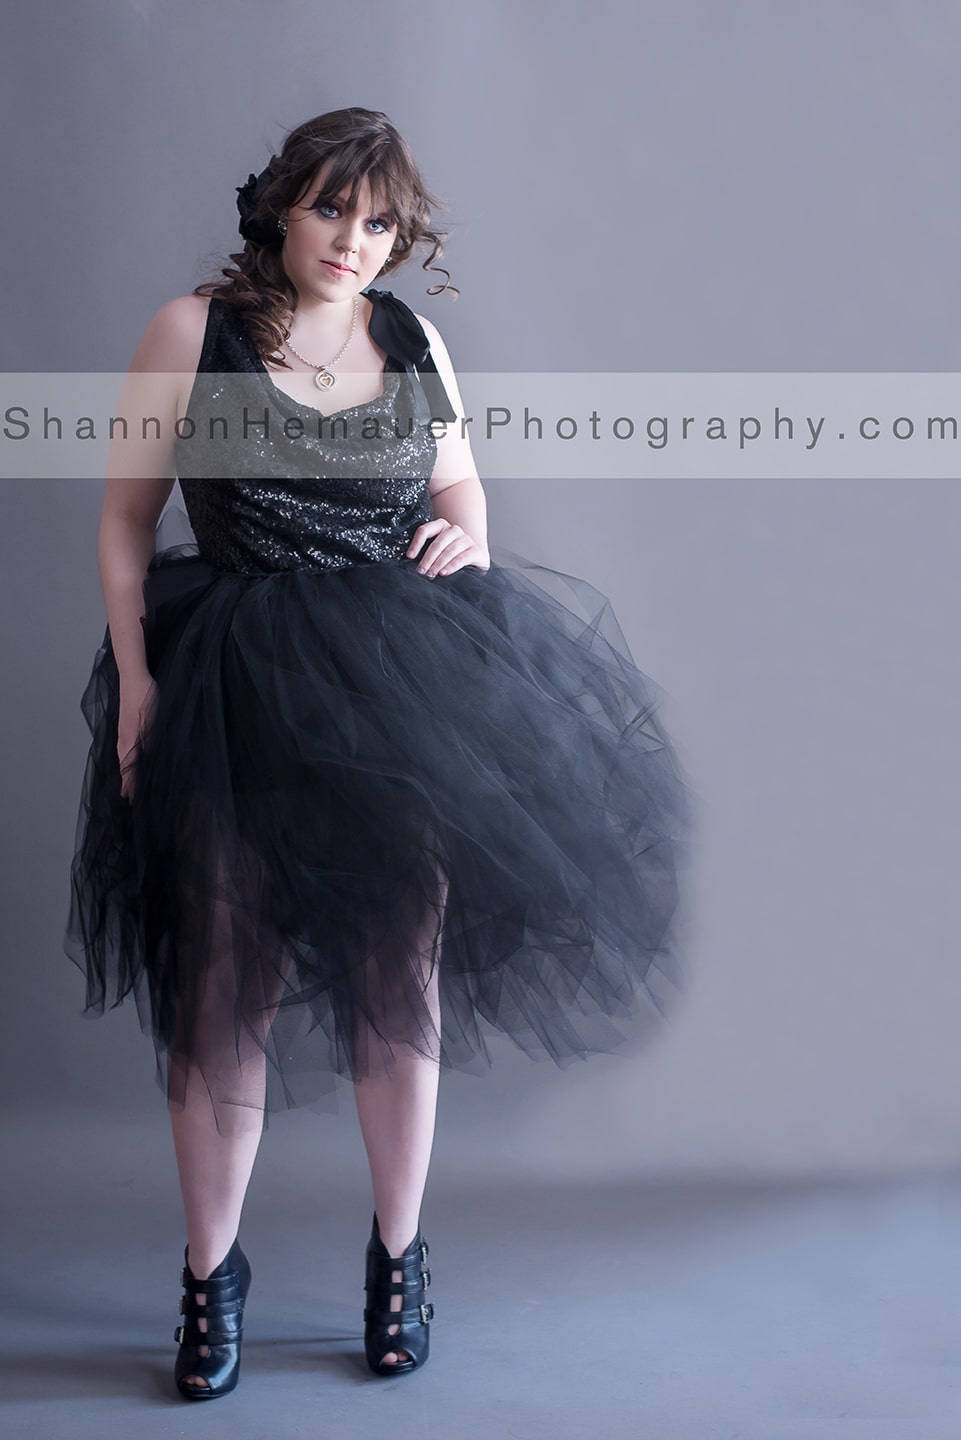 Glamour photography Gettysburg PA